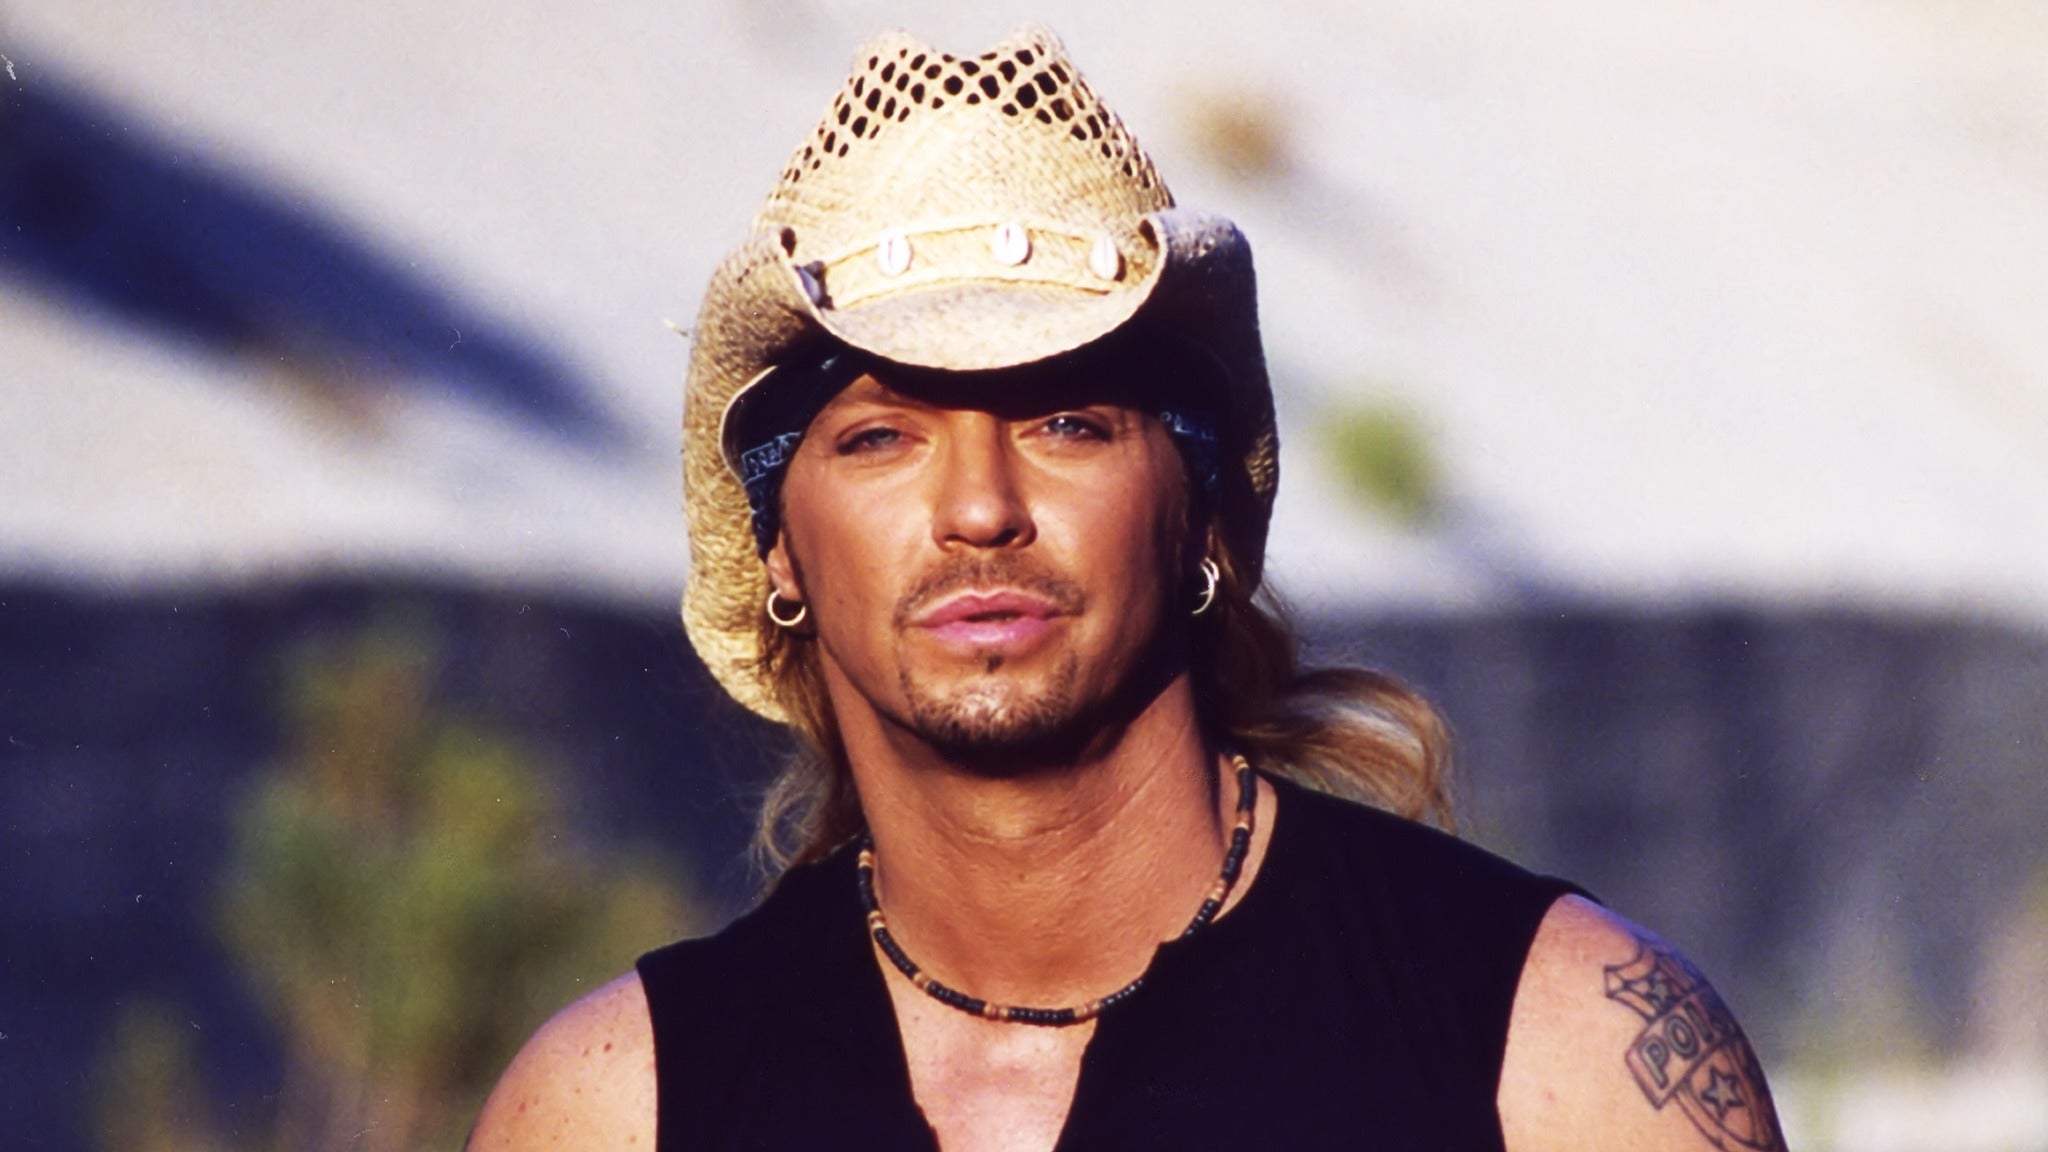 Bret Michaels "Fall Holiday Parti-Gras"